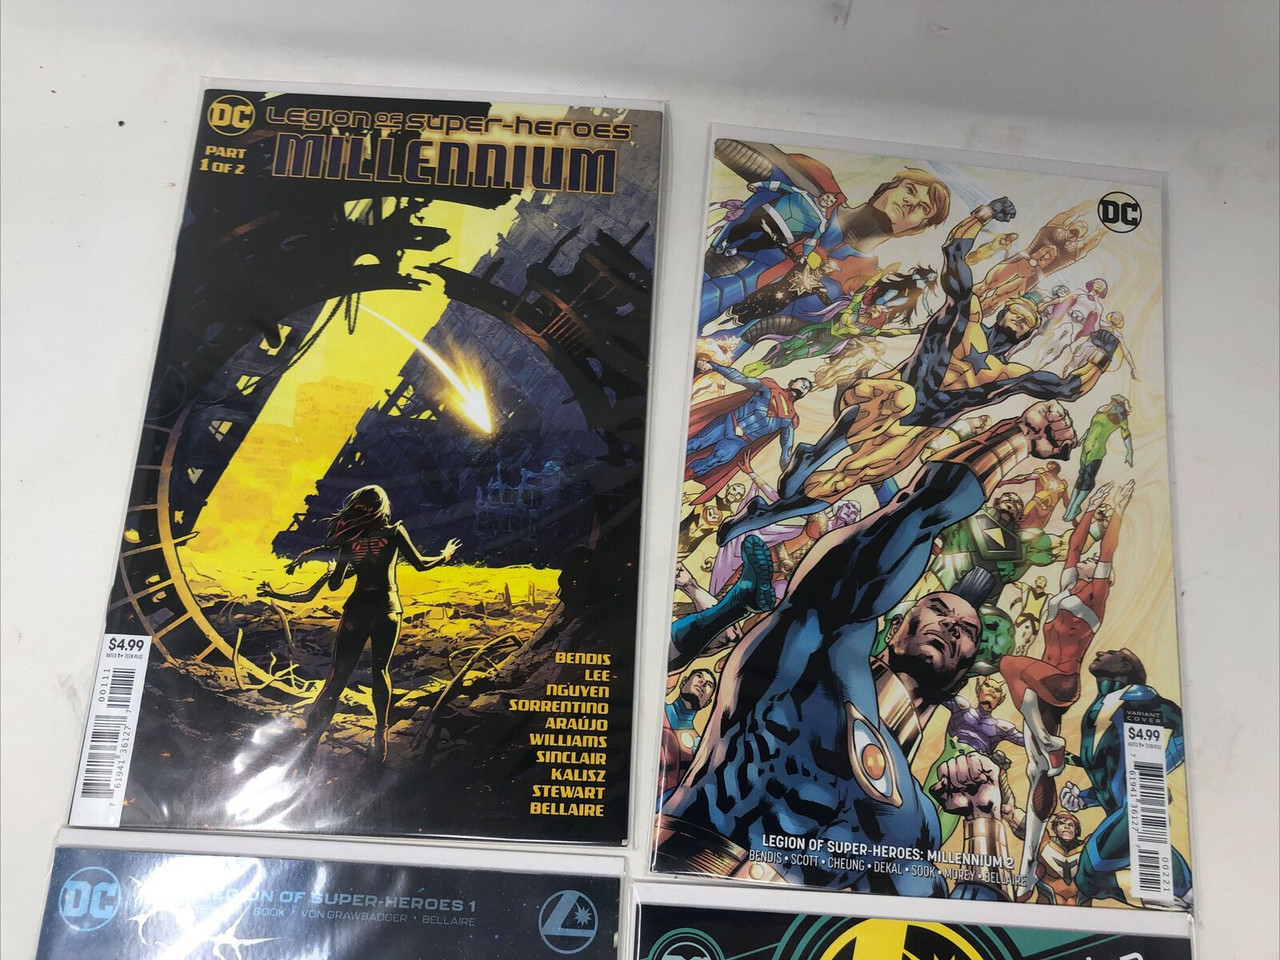 DC LEGION OF SUPER HEROES #1 AND VARIANT + MILLENNIUM #1-2 2019 COMIC - PREOWNED